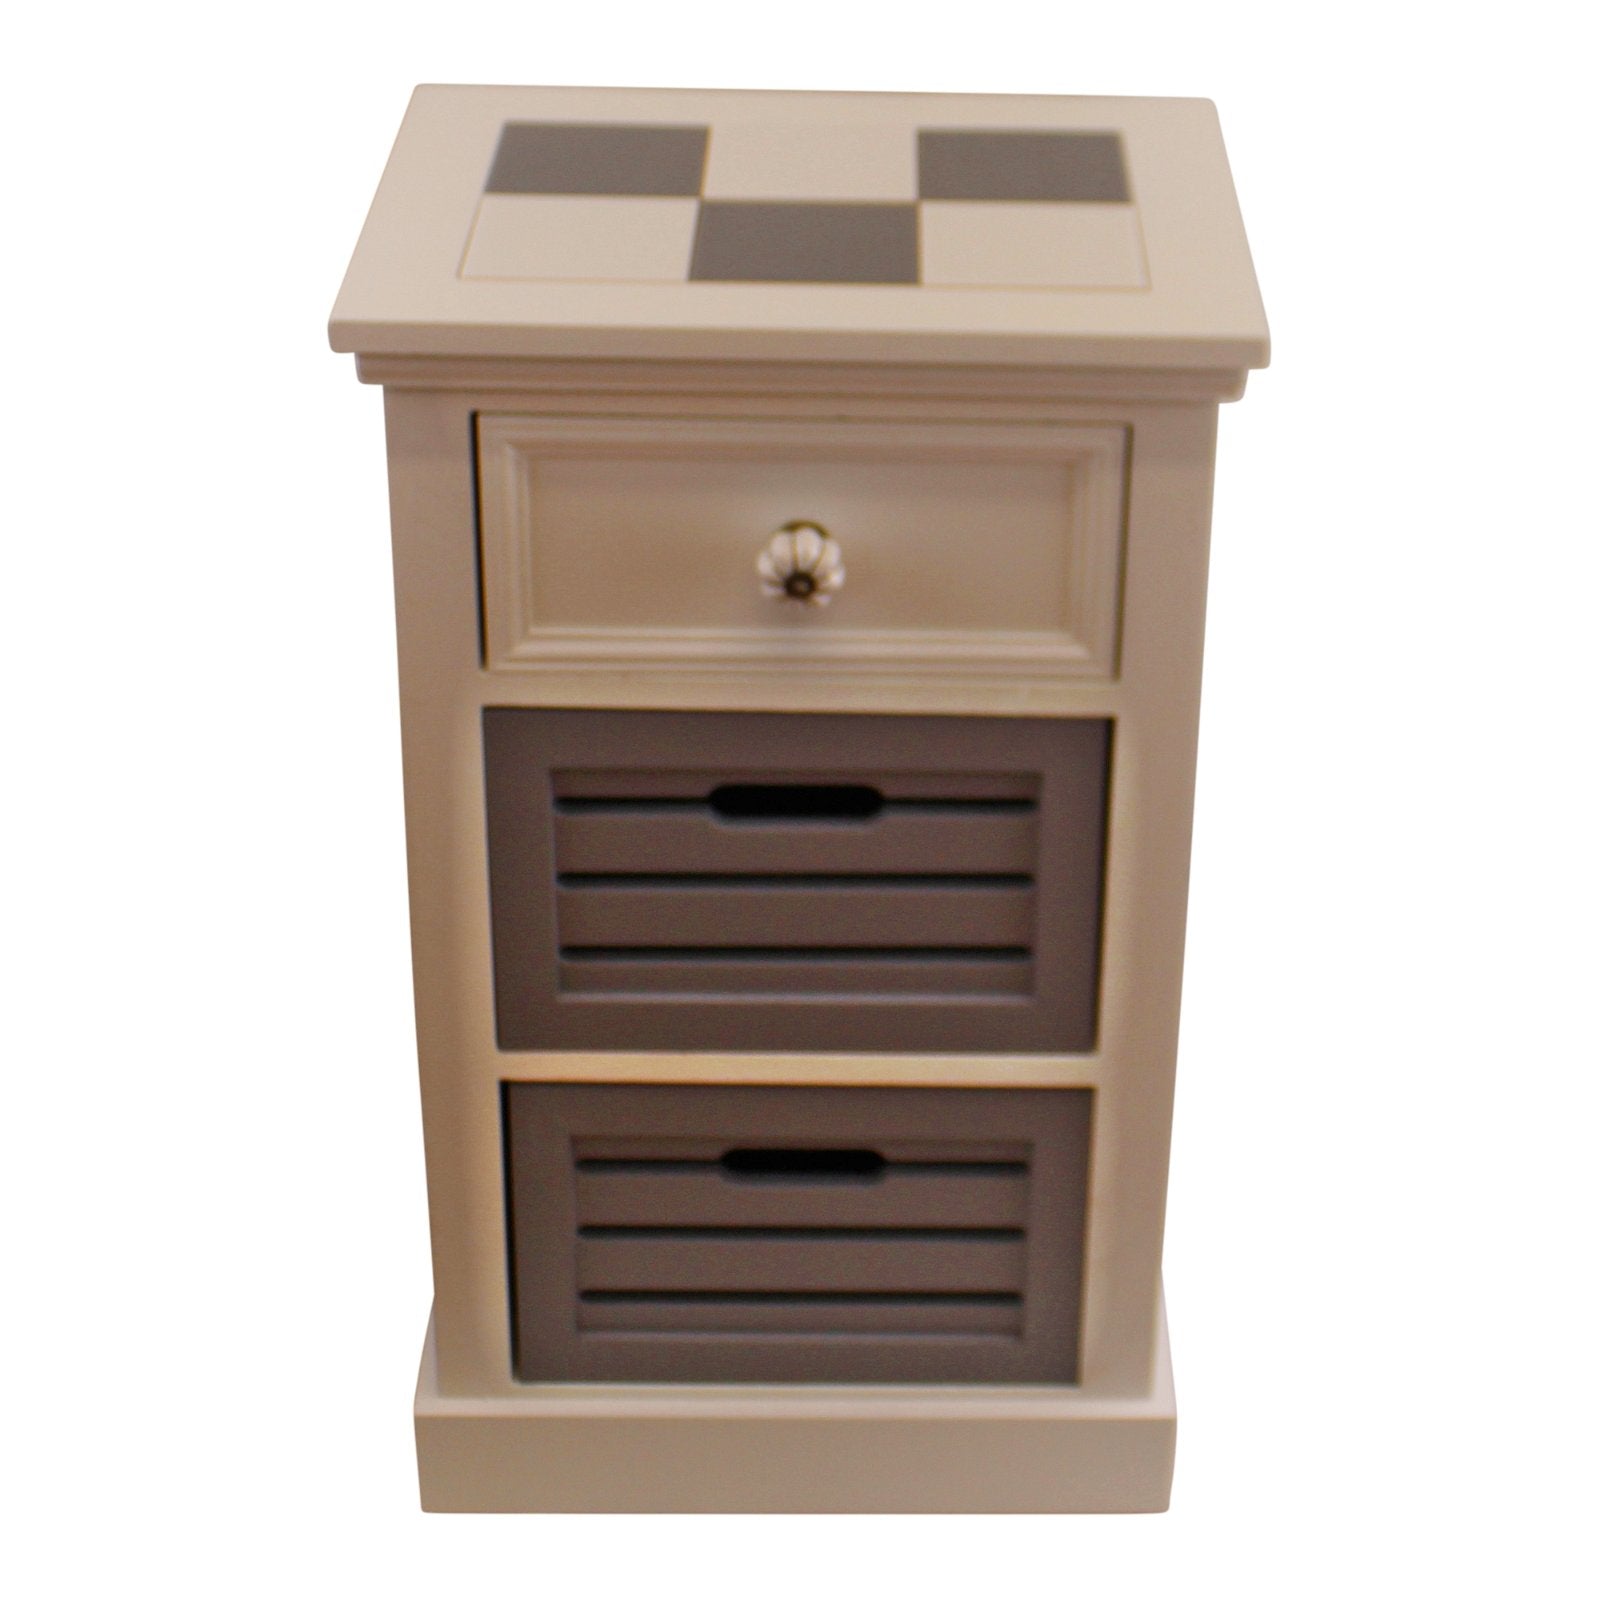 Contemporary Grey & White Chest Of Drawers, 3 Drawers